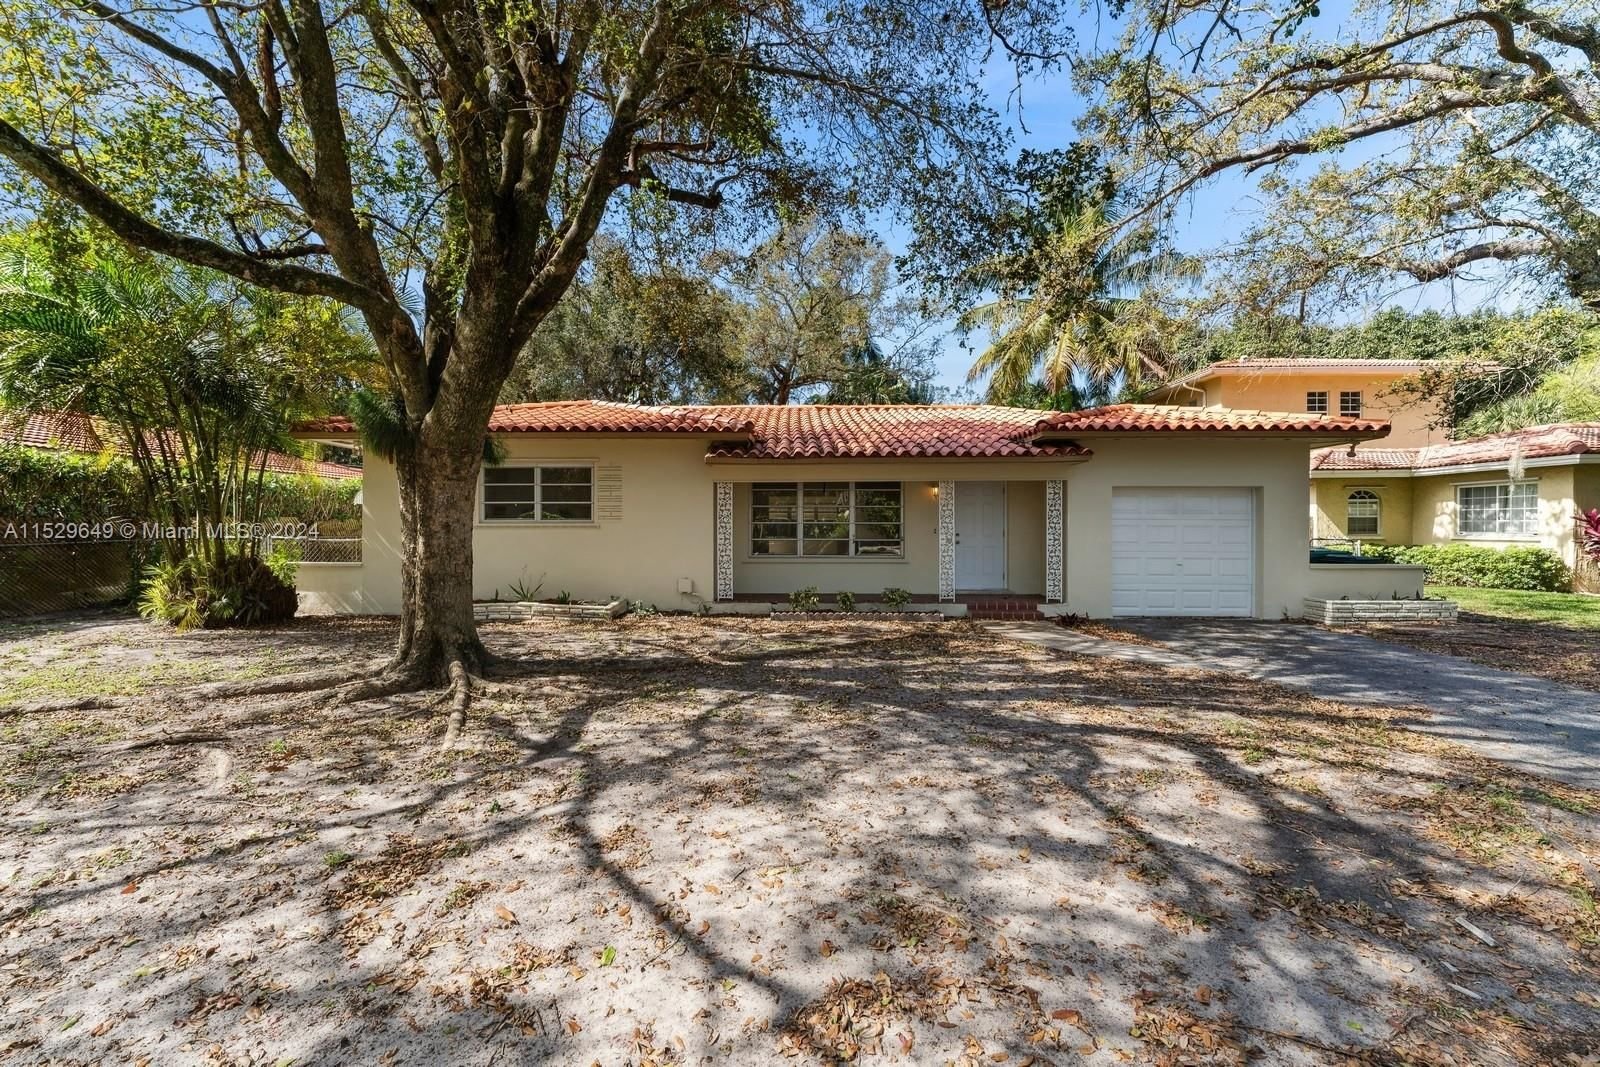 Real estate property located at 11908 5th Ave, Miami-Dade County, BISCAYNE PARK ESTATES, Biscayne Park, FL